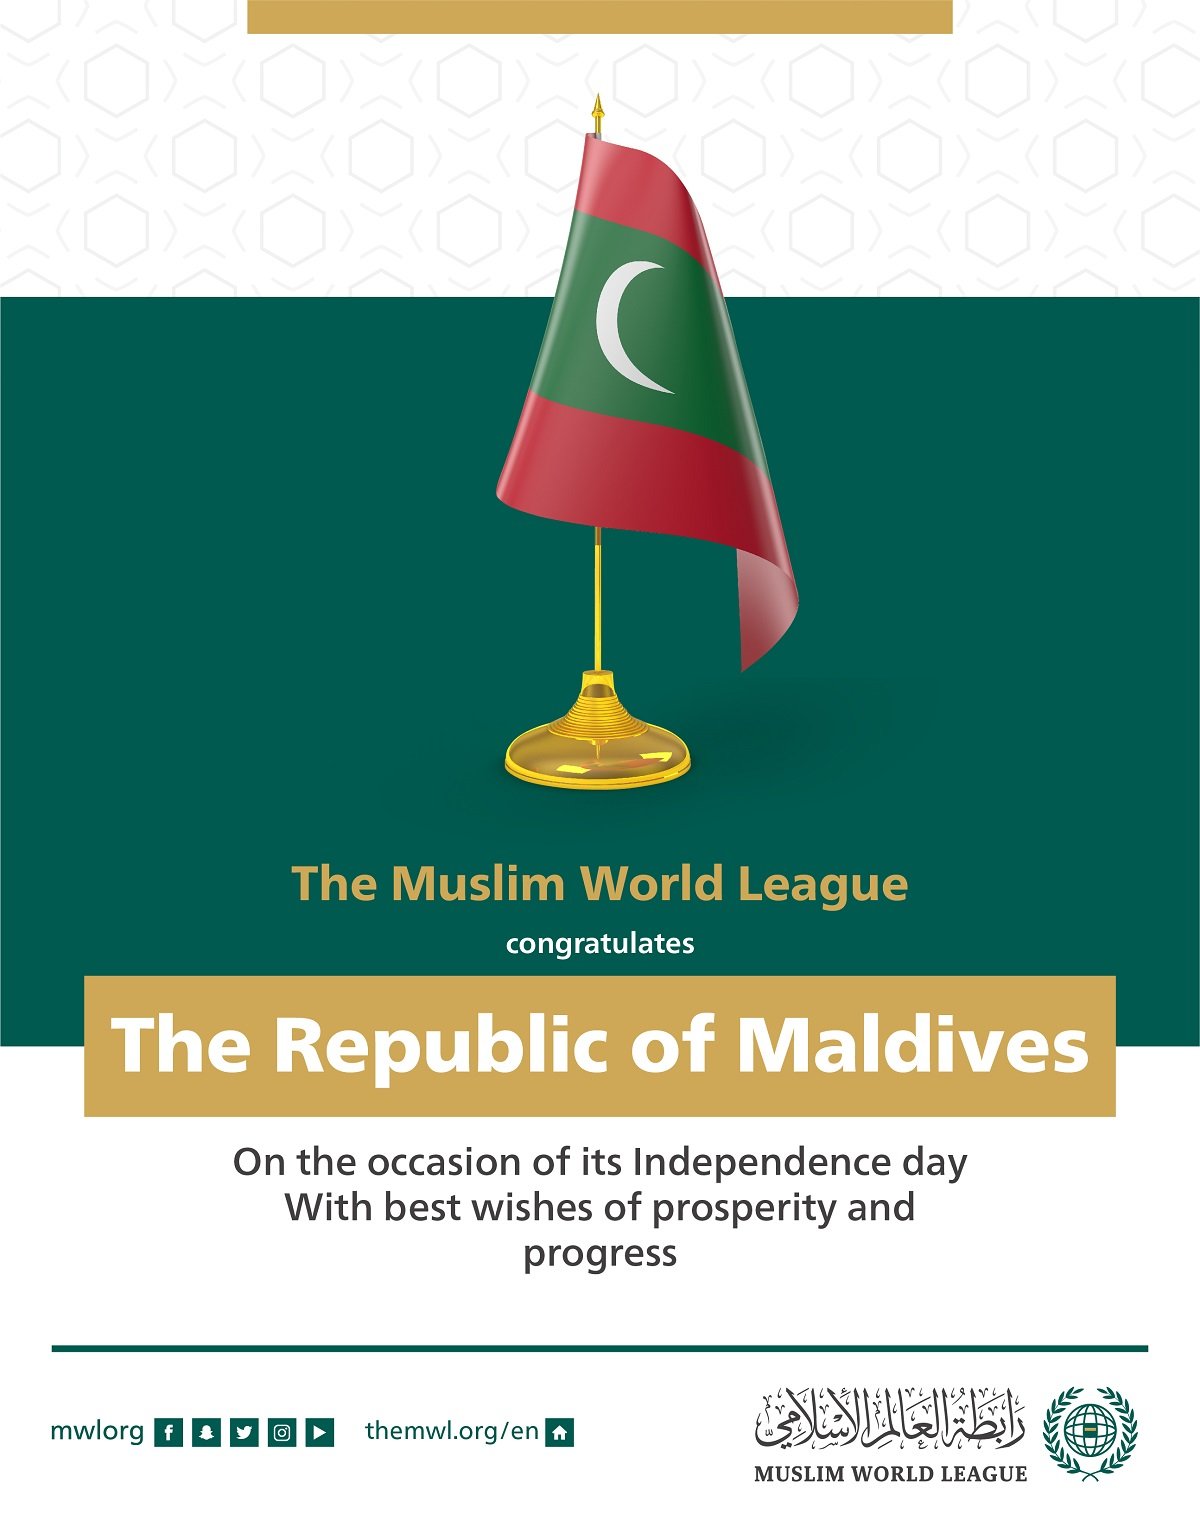 The Muslim World League congratulates the Republic of Maldives on its National Day